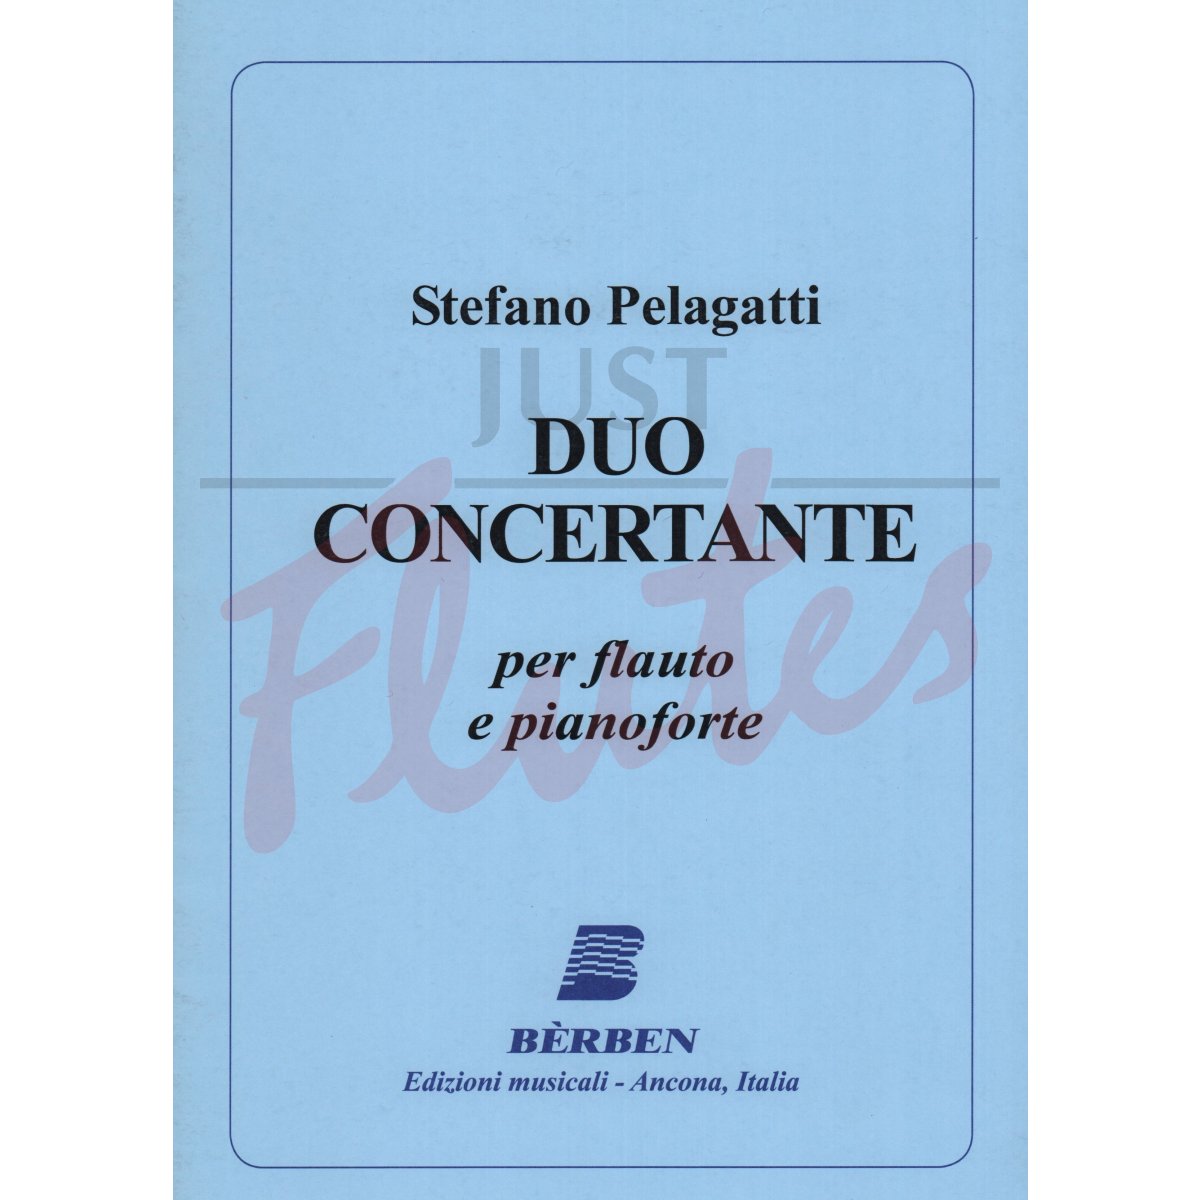 Duo Concertante for Flute and Piano